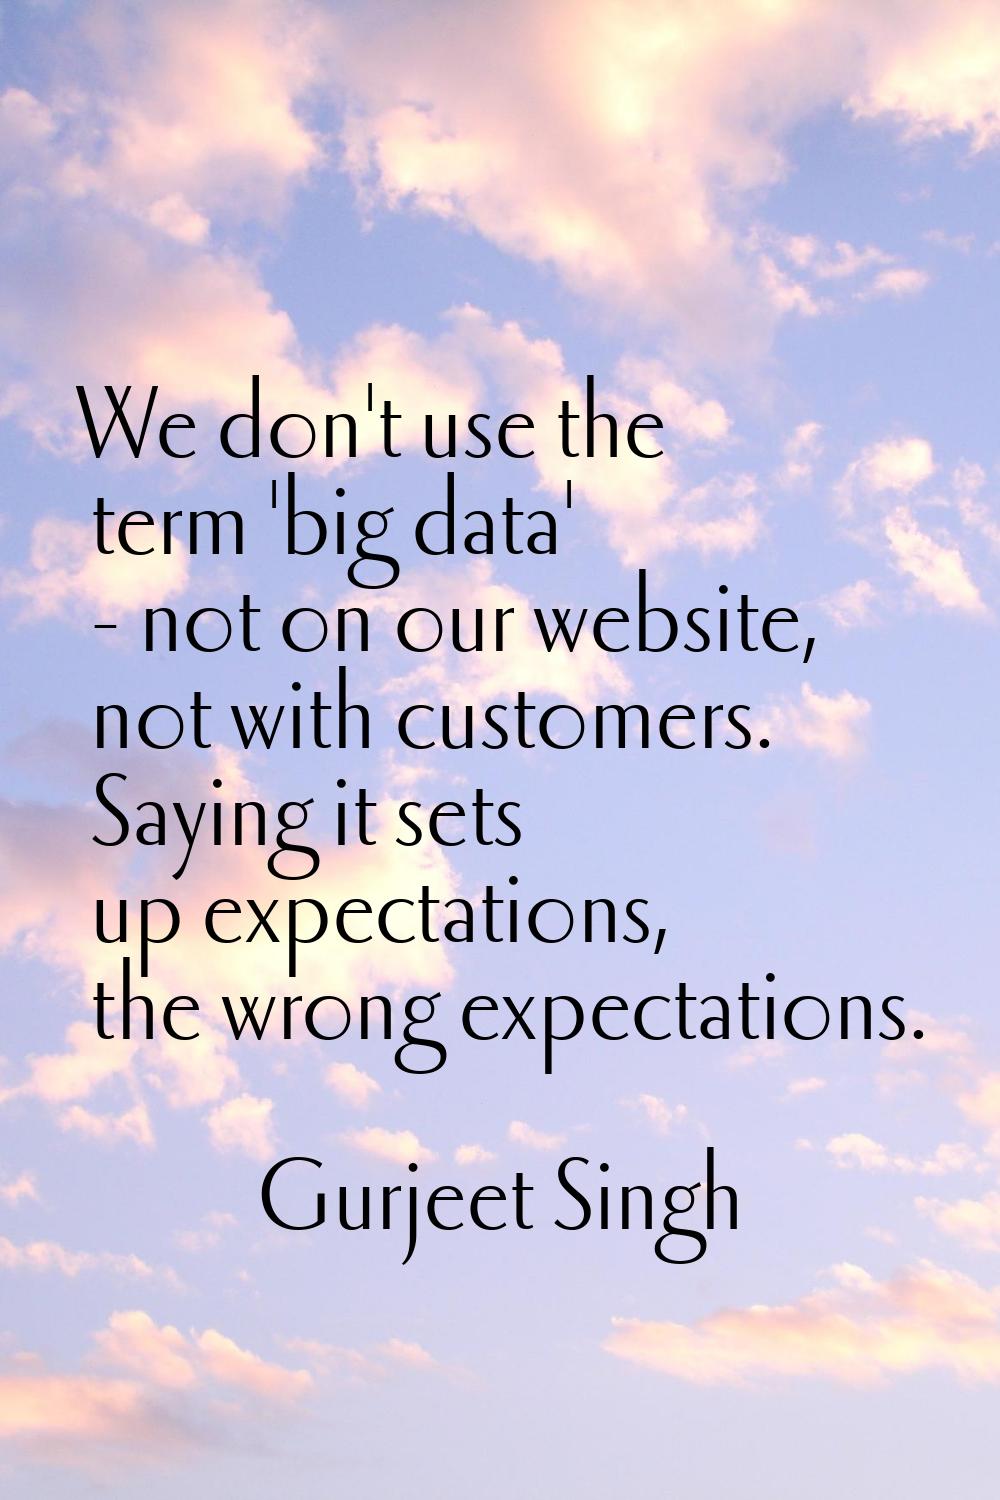 We don't use the term 'big data' - not on our website, not with customers. Saying it sets up expect